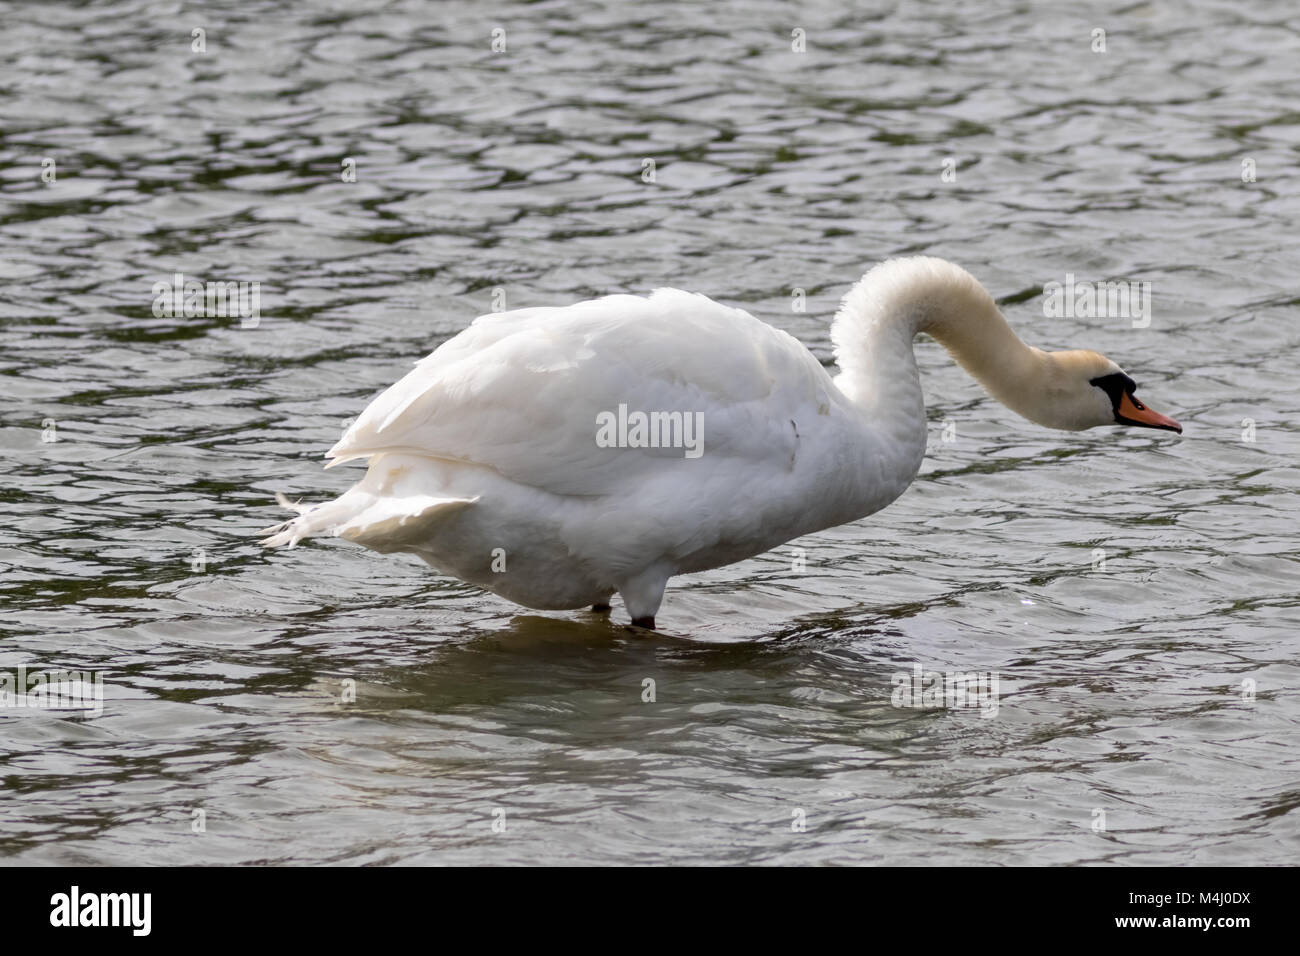 Swan with neck outstretched Stock Photo